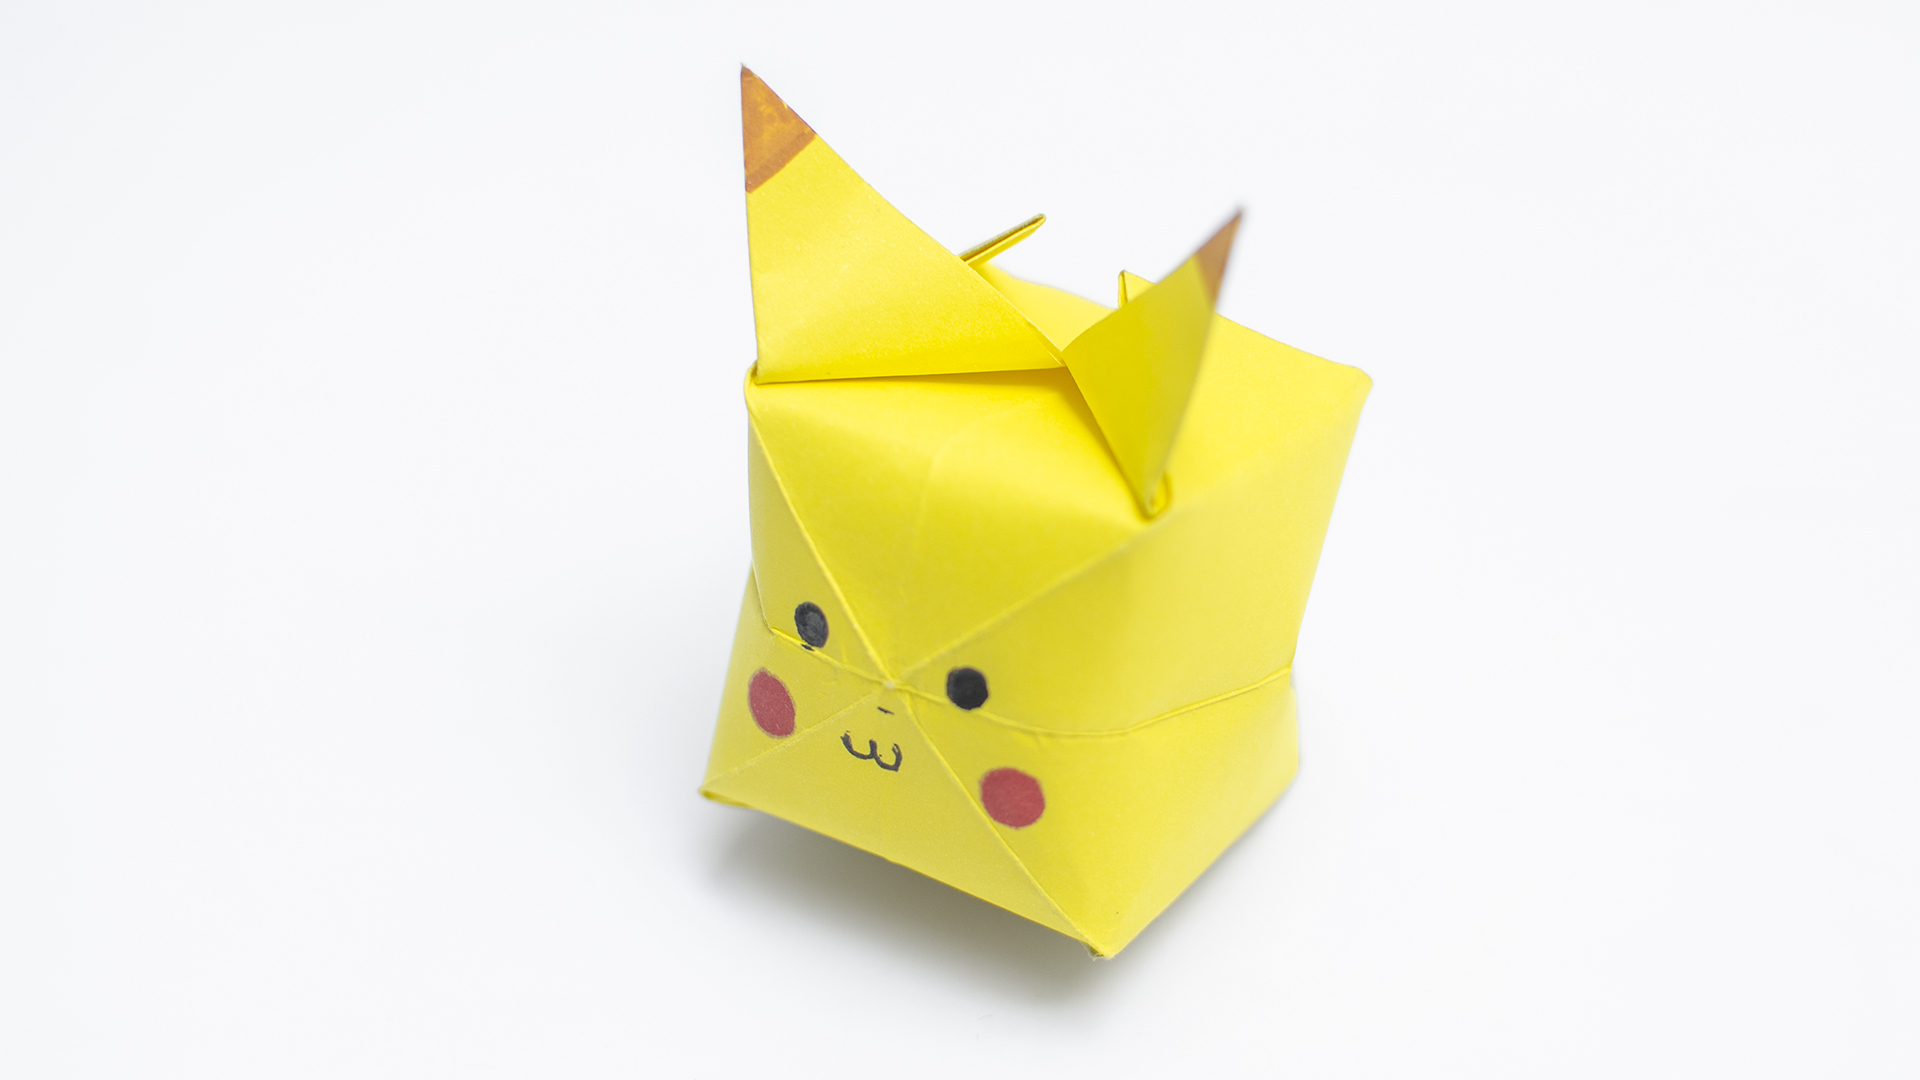 How To Make Origami Soccer Ball How To Make An Origami Pikachu With Pictures Wikihow